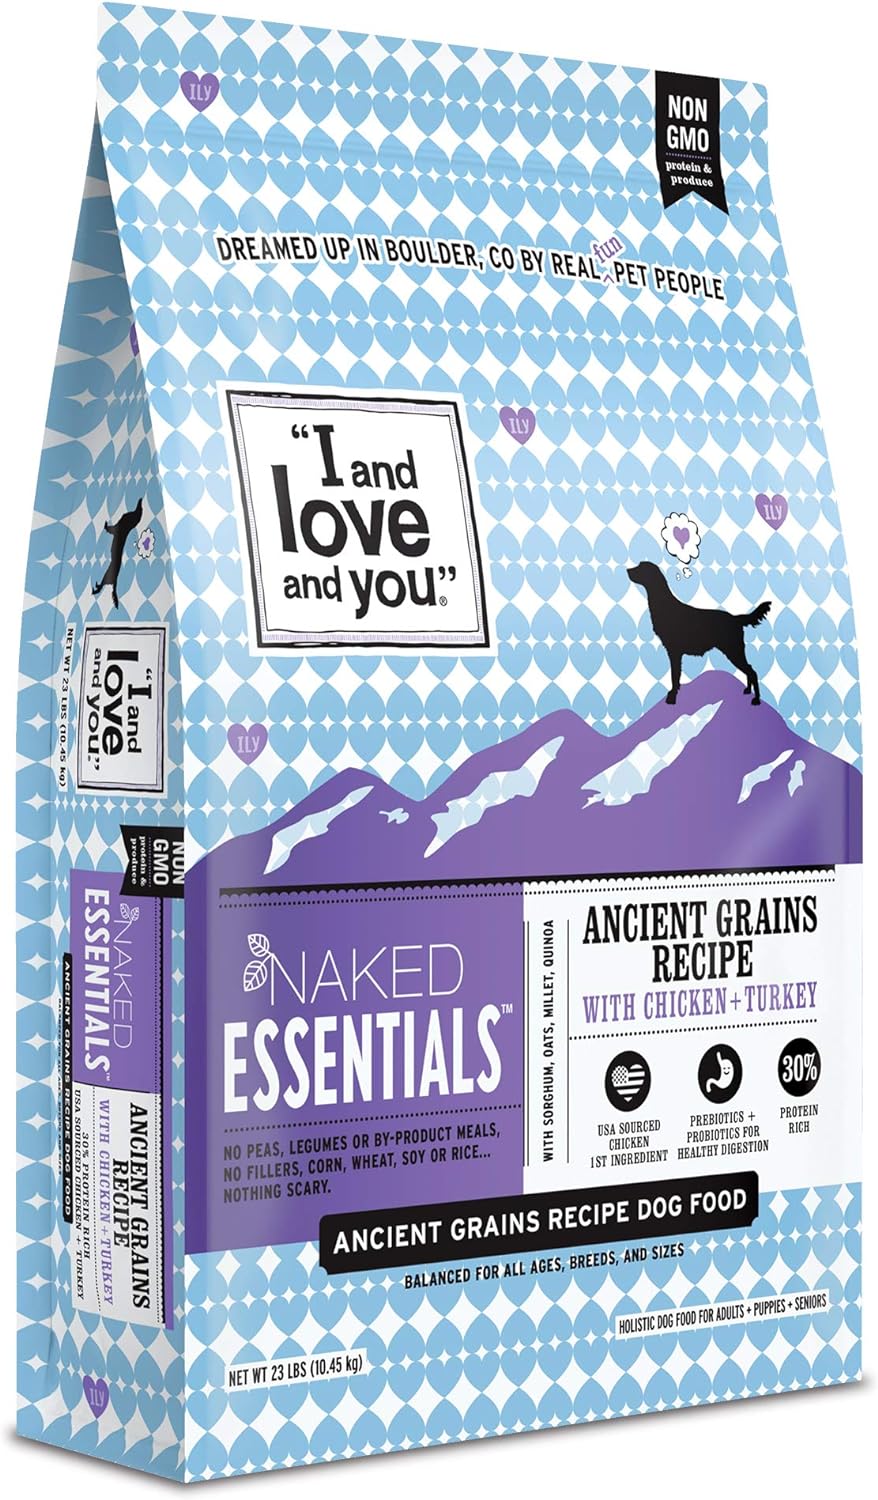 I and Love and You Naked Essentials Ancient Grains Recipe with Chicken + Turkey Dry Dog Food – Gallery Image 1